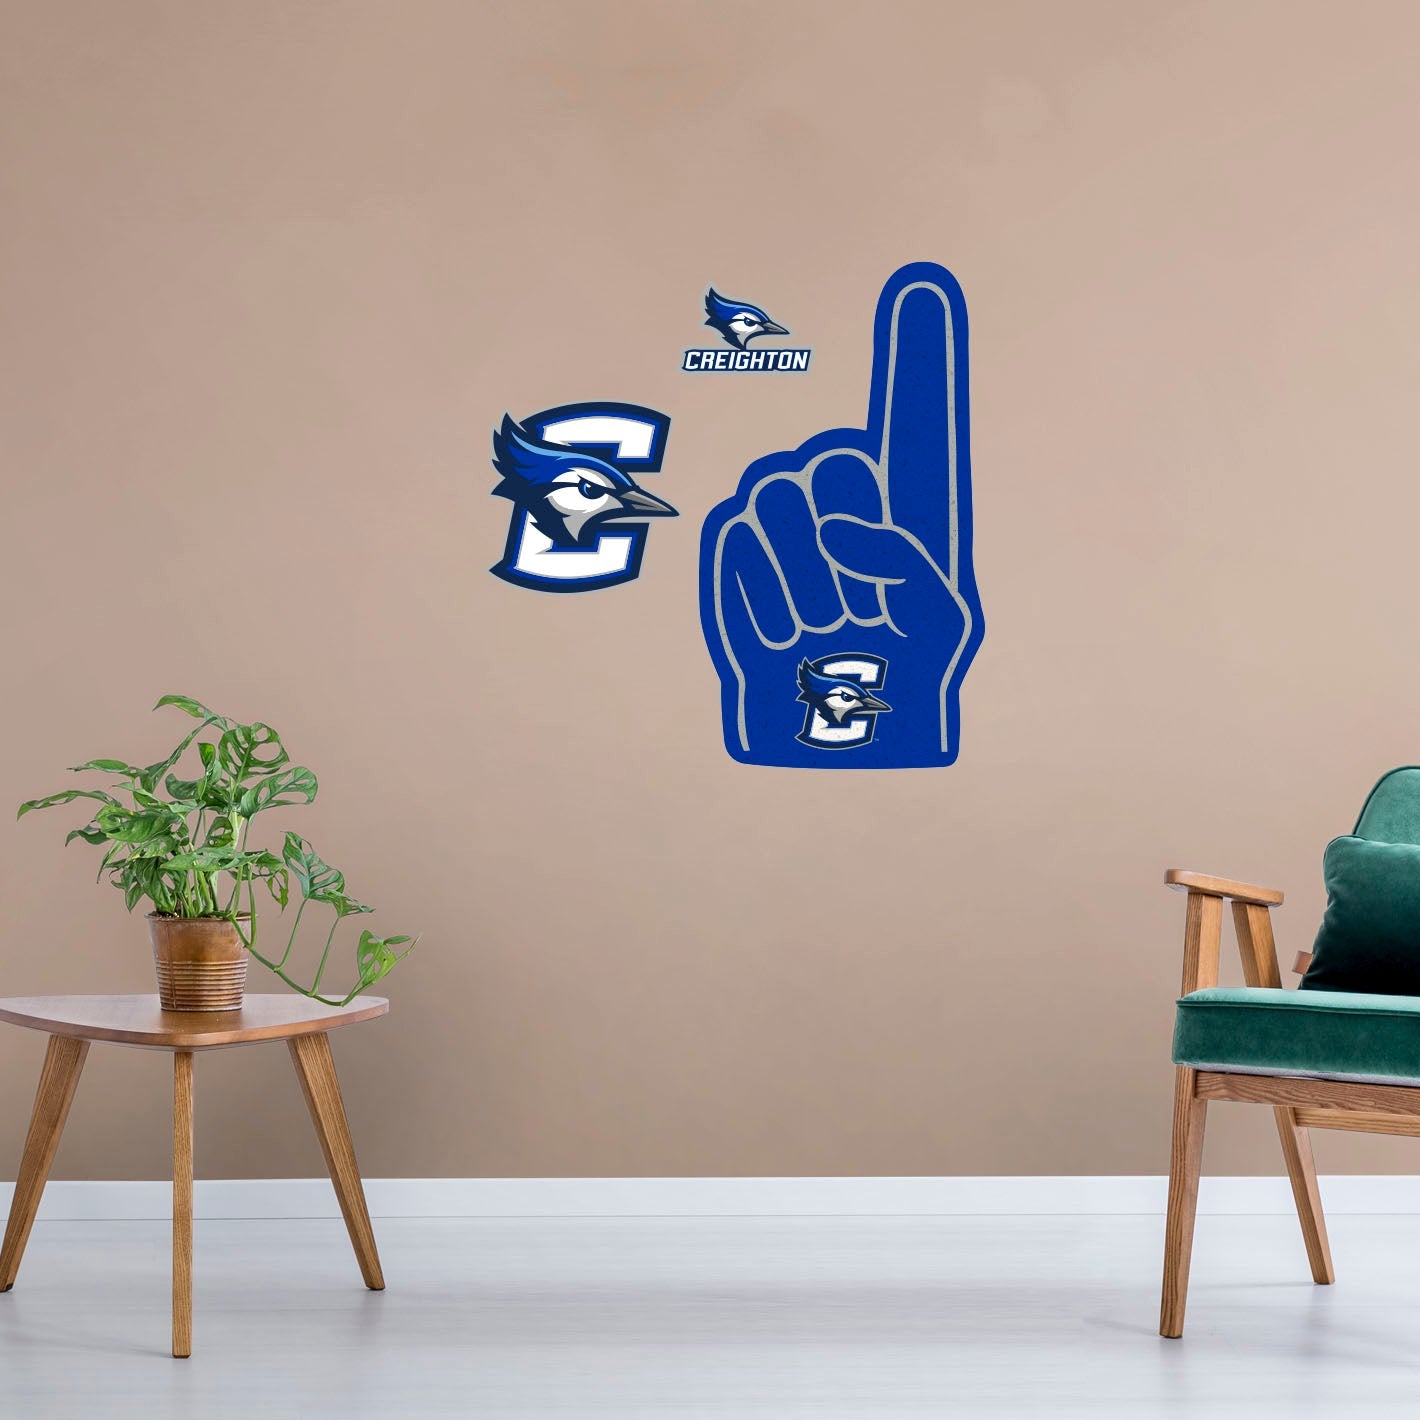 Creighton Blue Jays: Foam Finger - Officially Licensed NCAA Removable Adhesive Decal